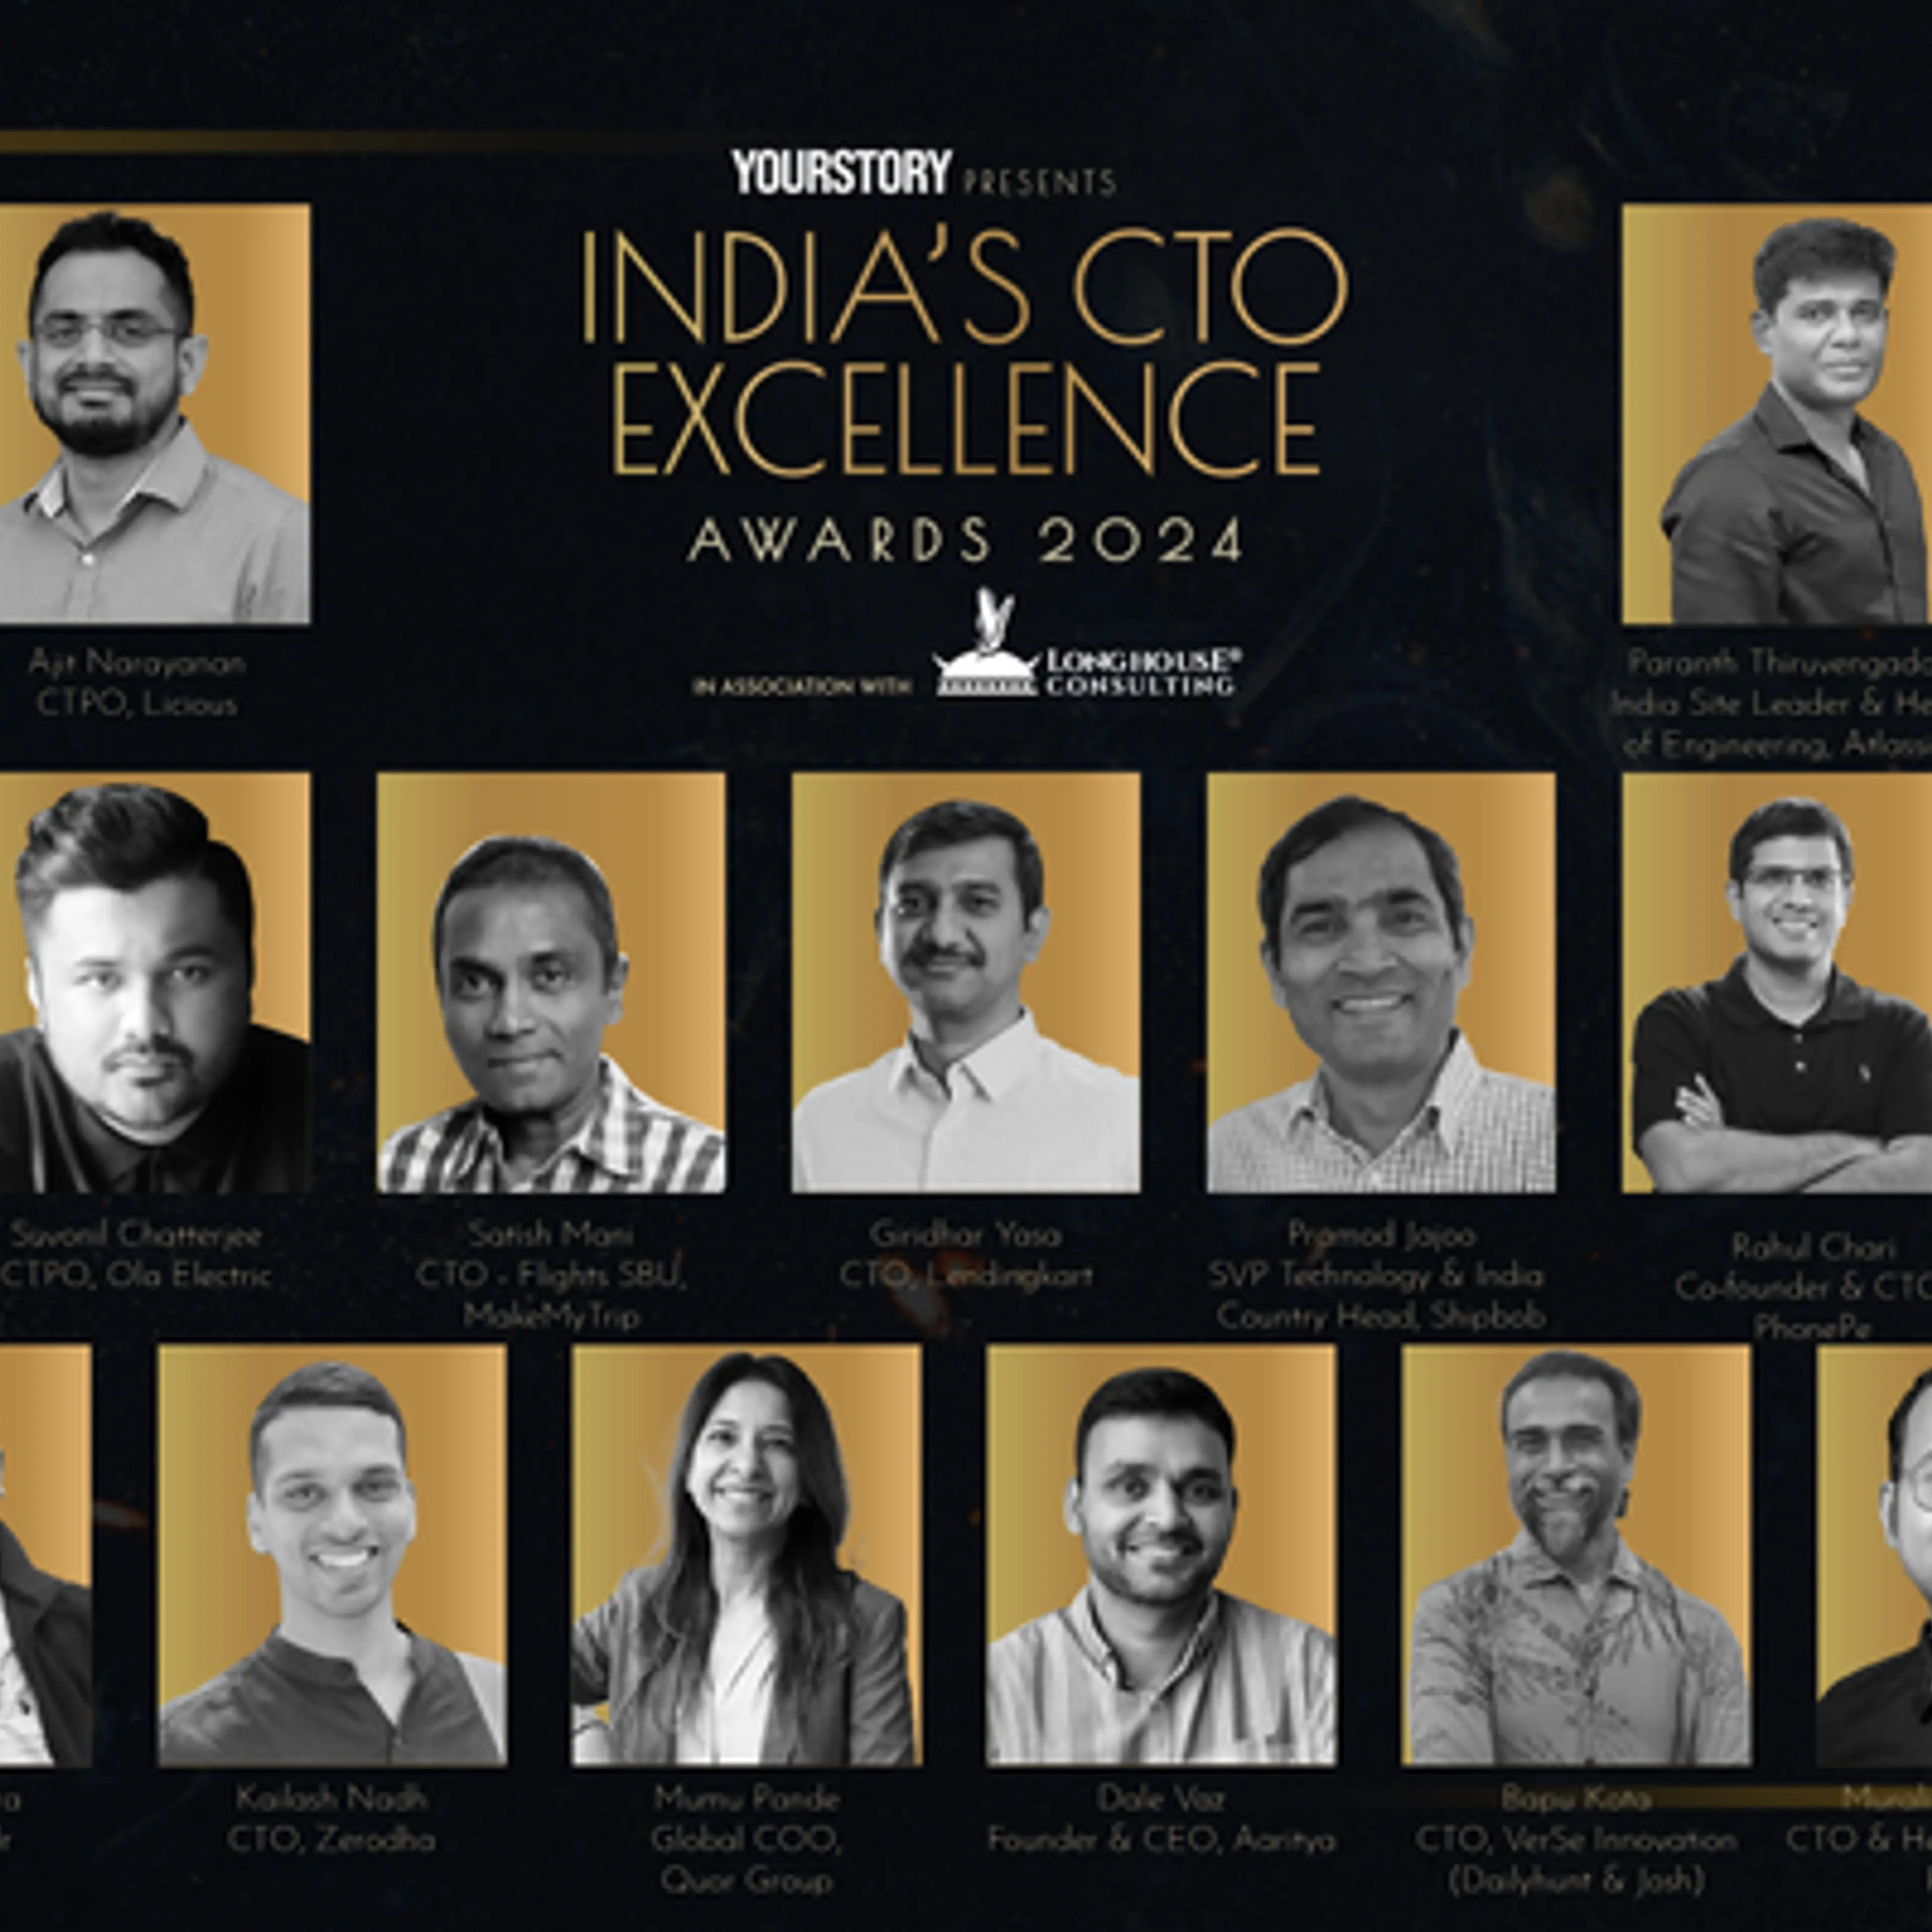 Meet the winners of YourStory India’s CTO Excellence Awards 2024